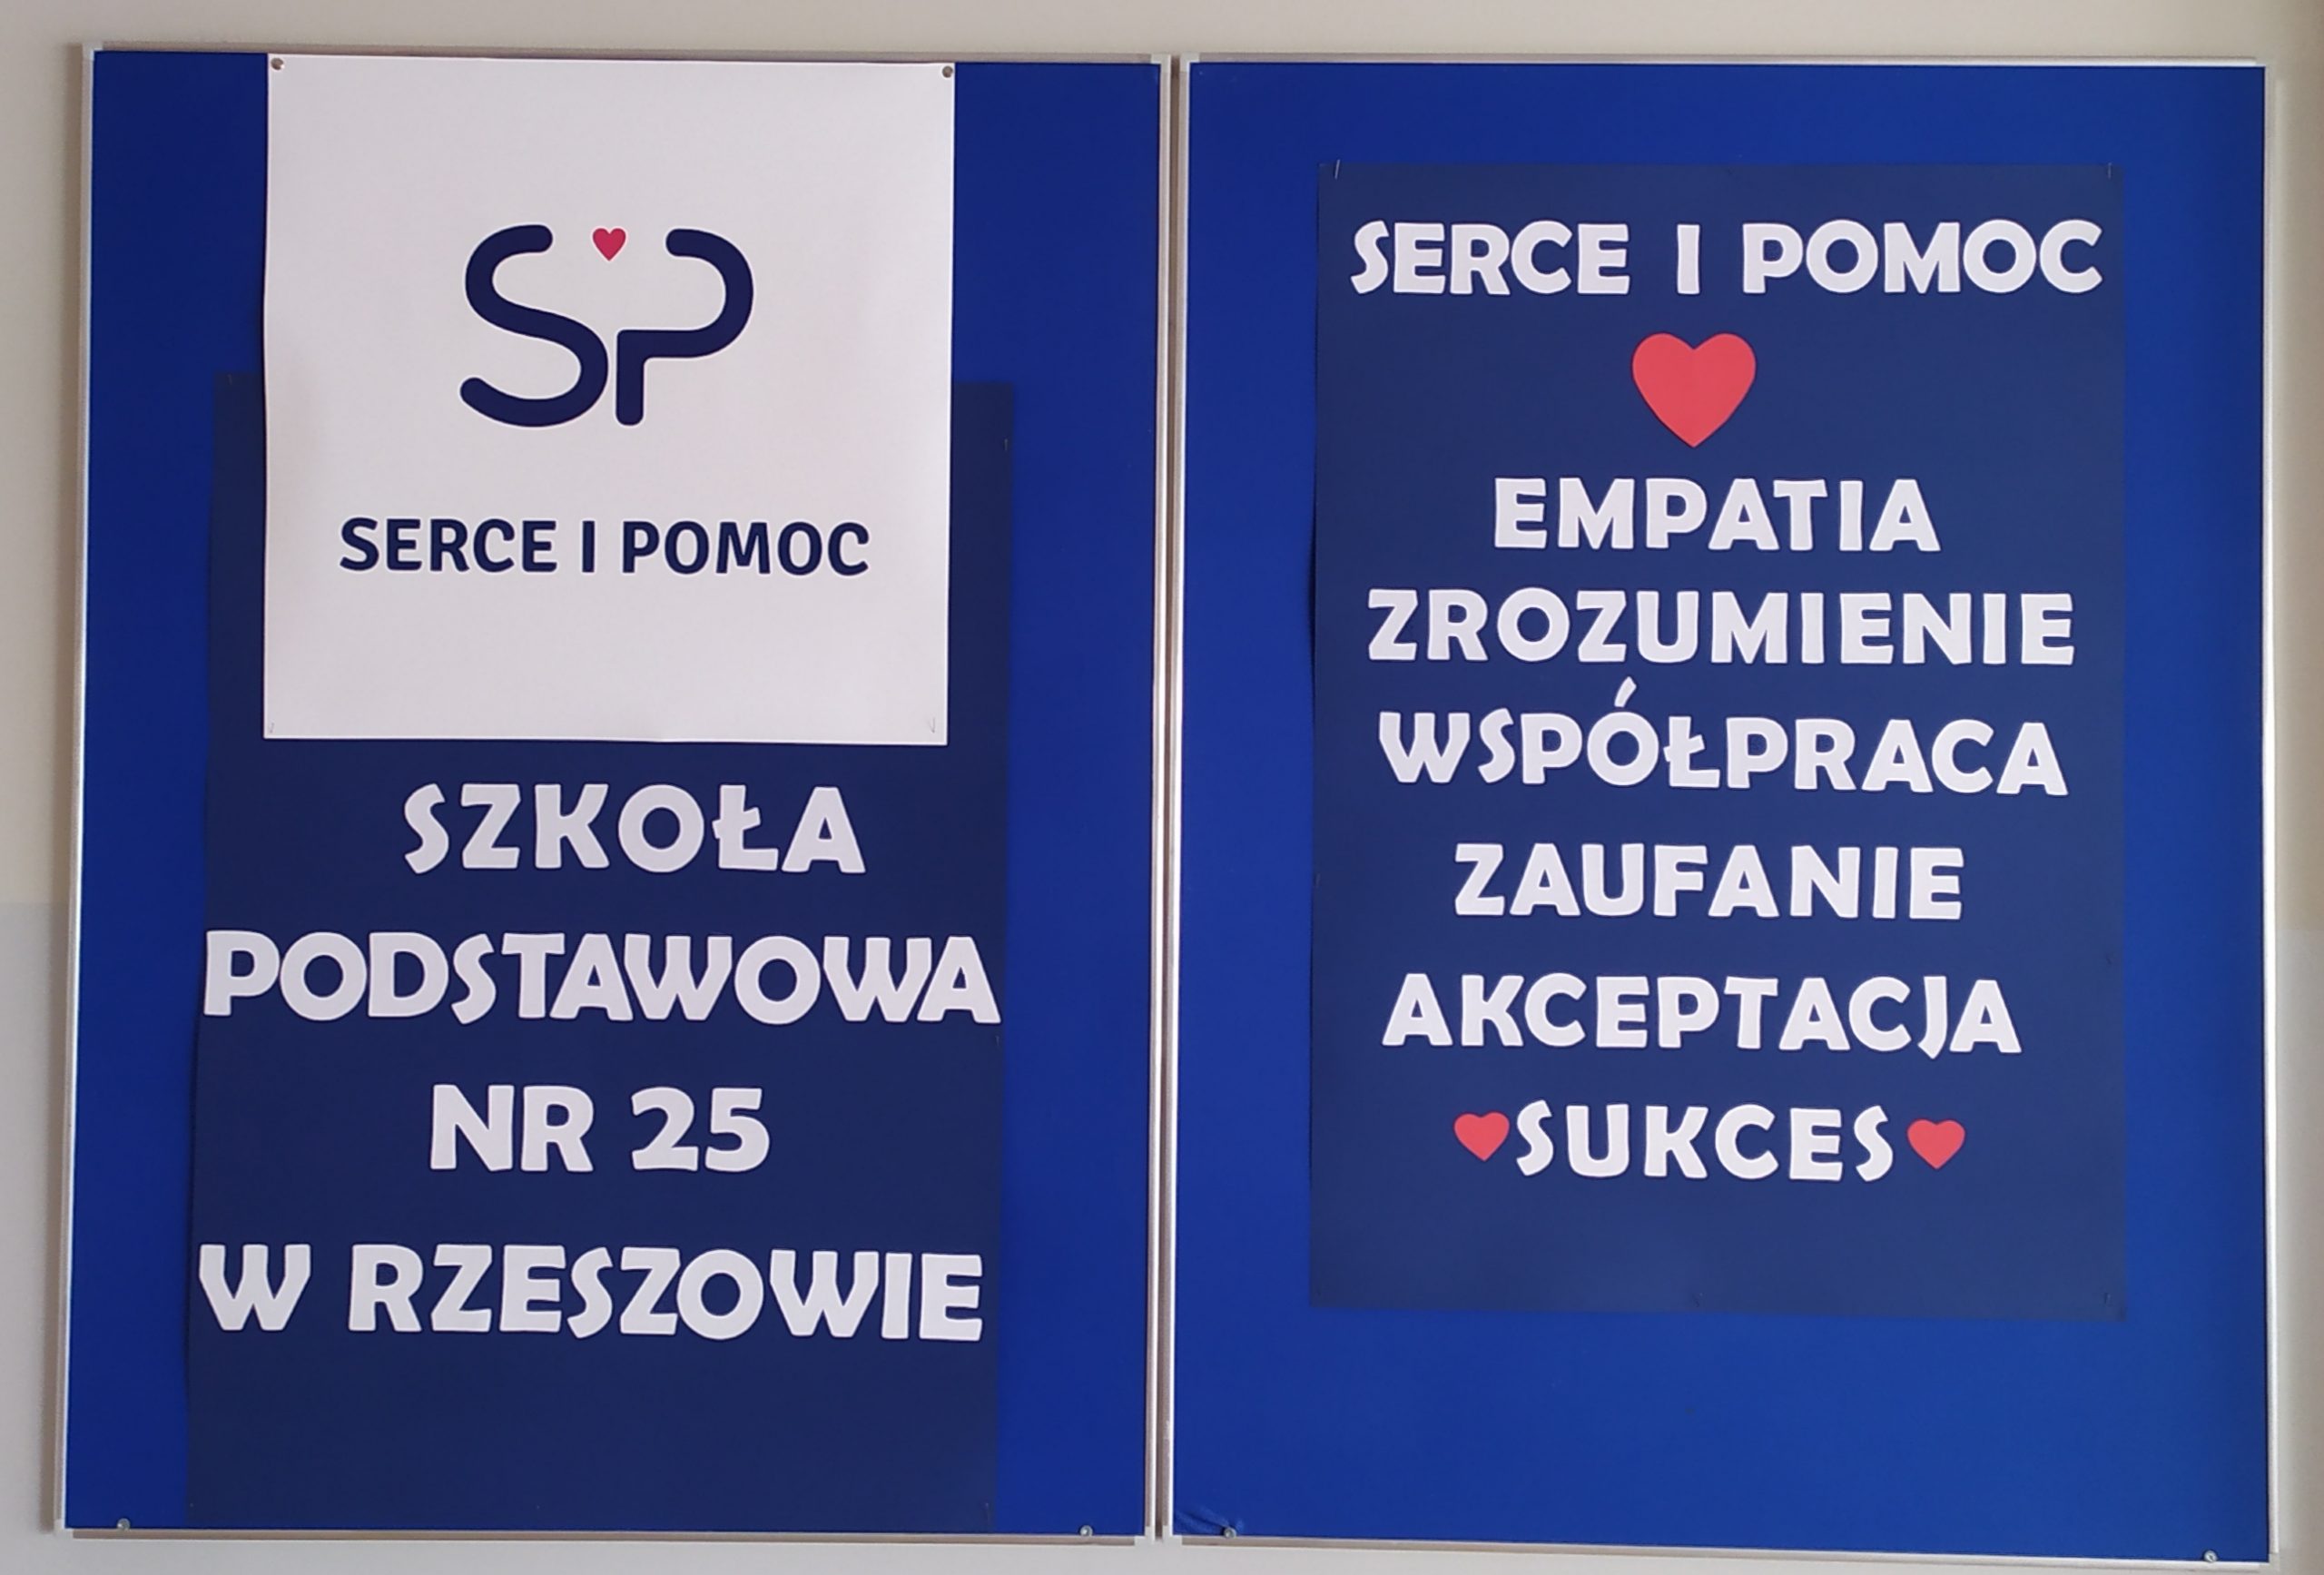 You are currently viewing SP! SERCE I POMOC